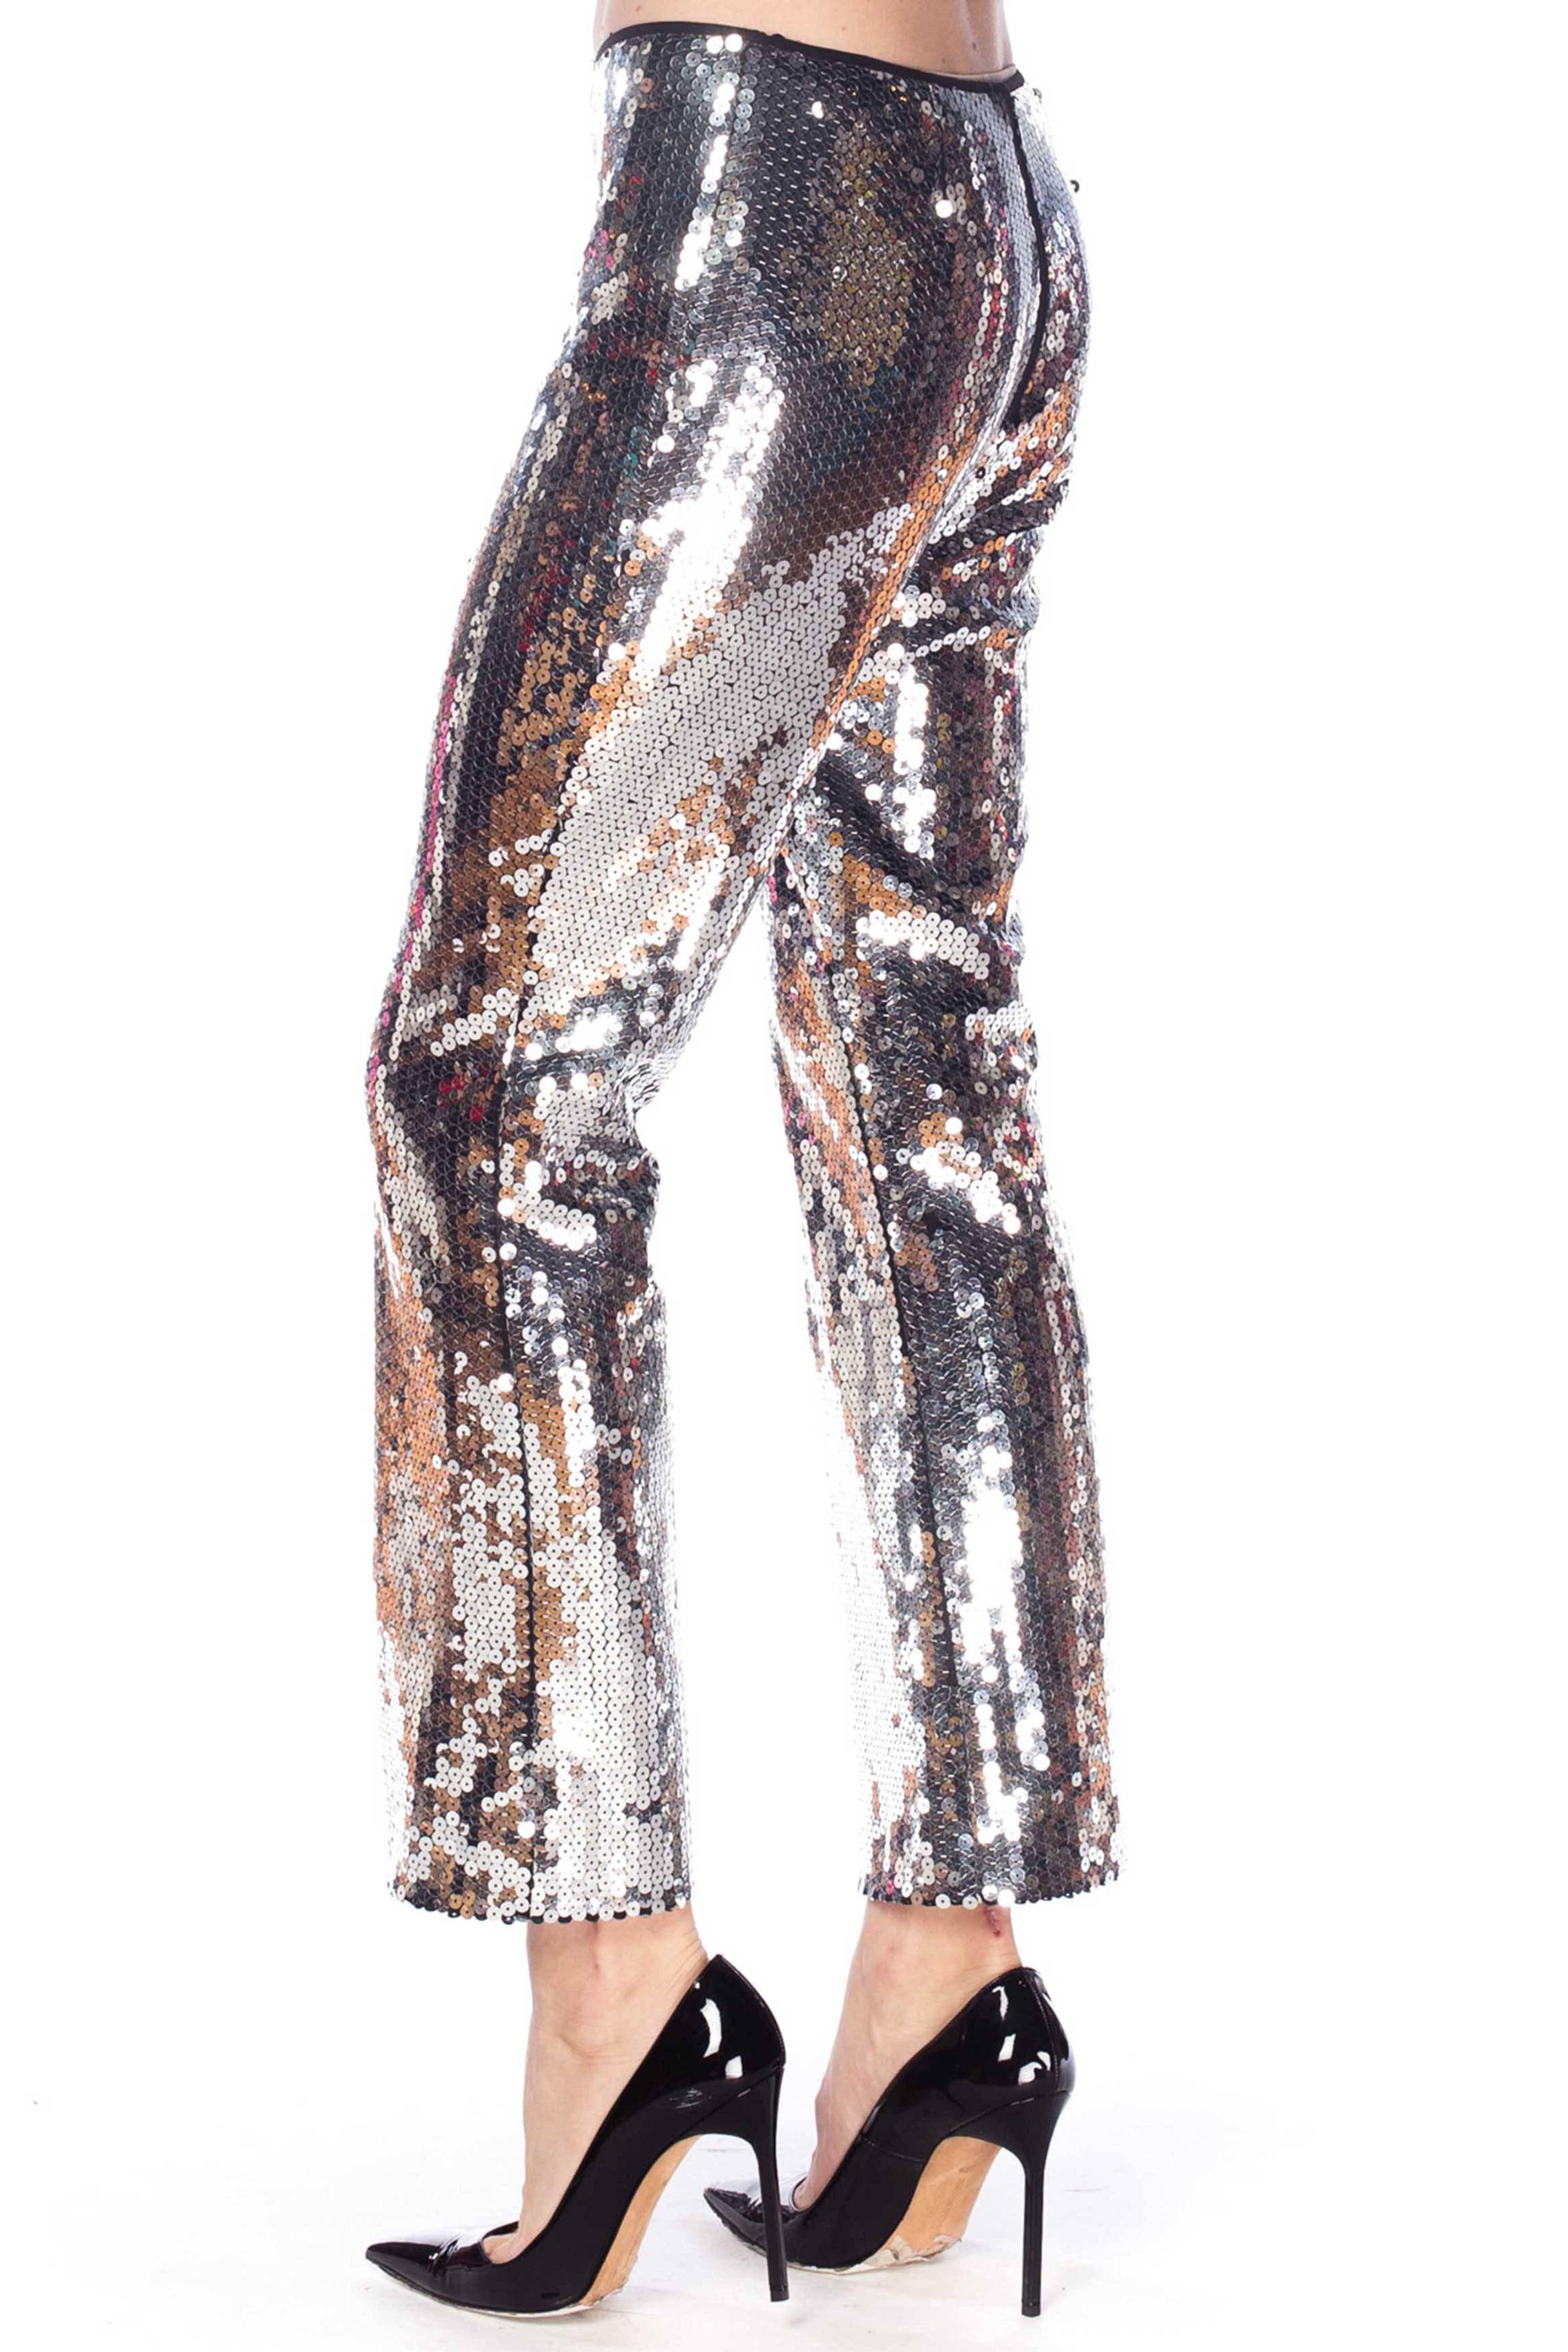 Dolce & Gabbana Silver Metallic Sequined Low-Rise Pants 3